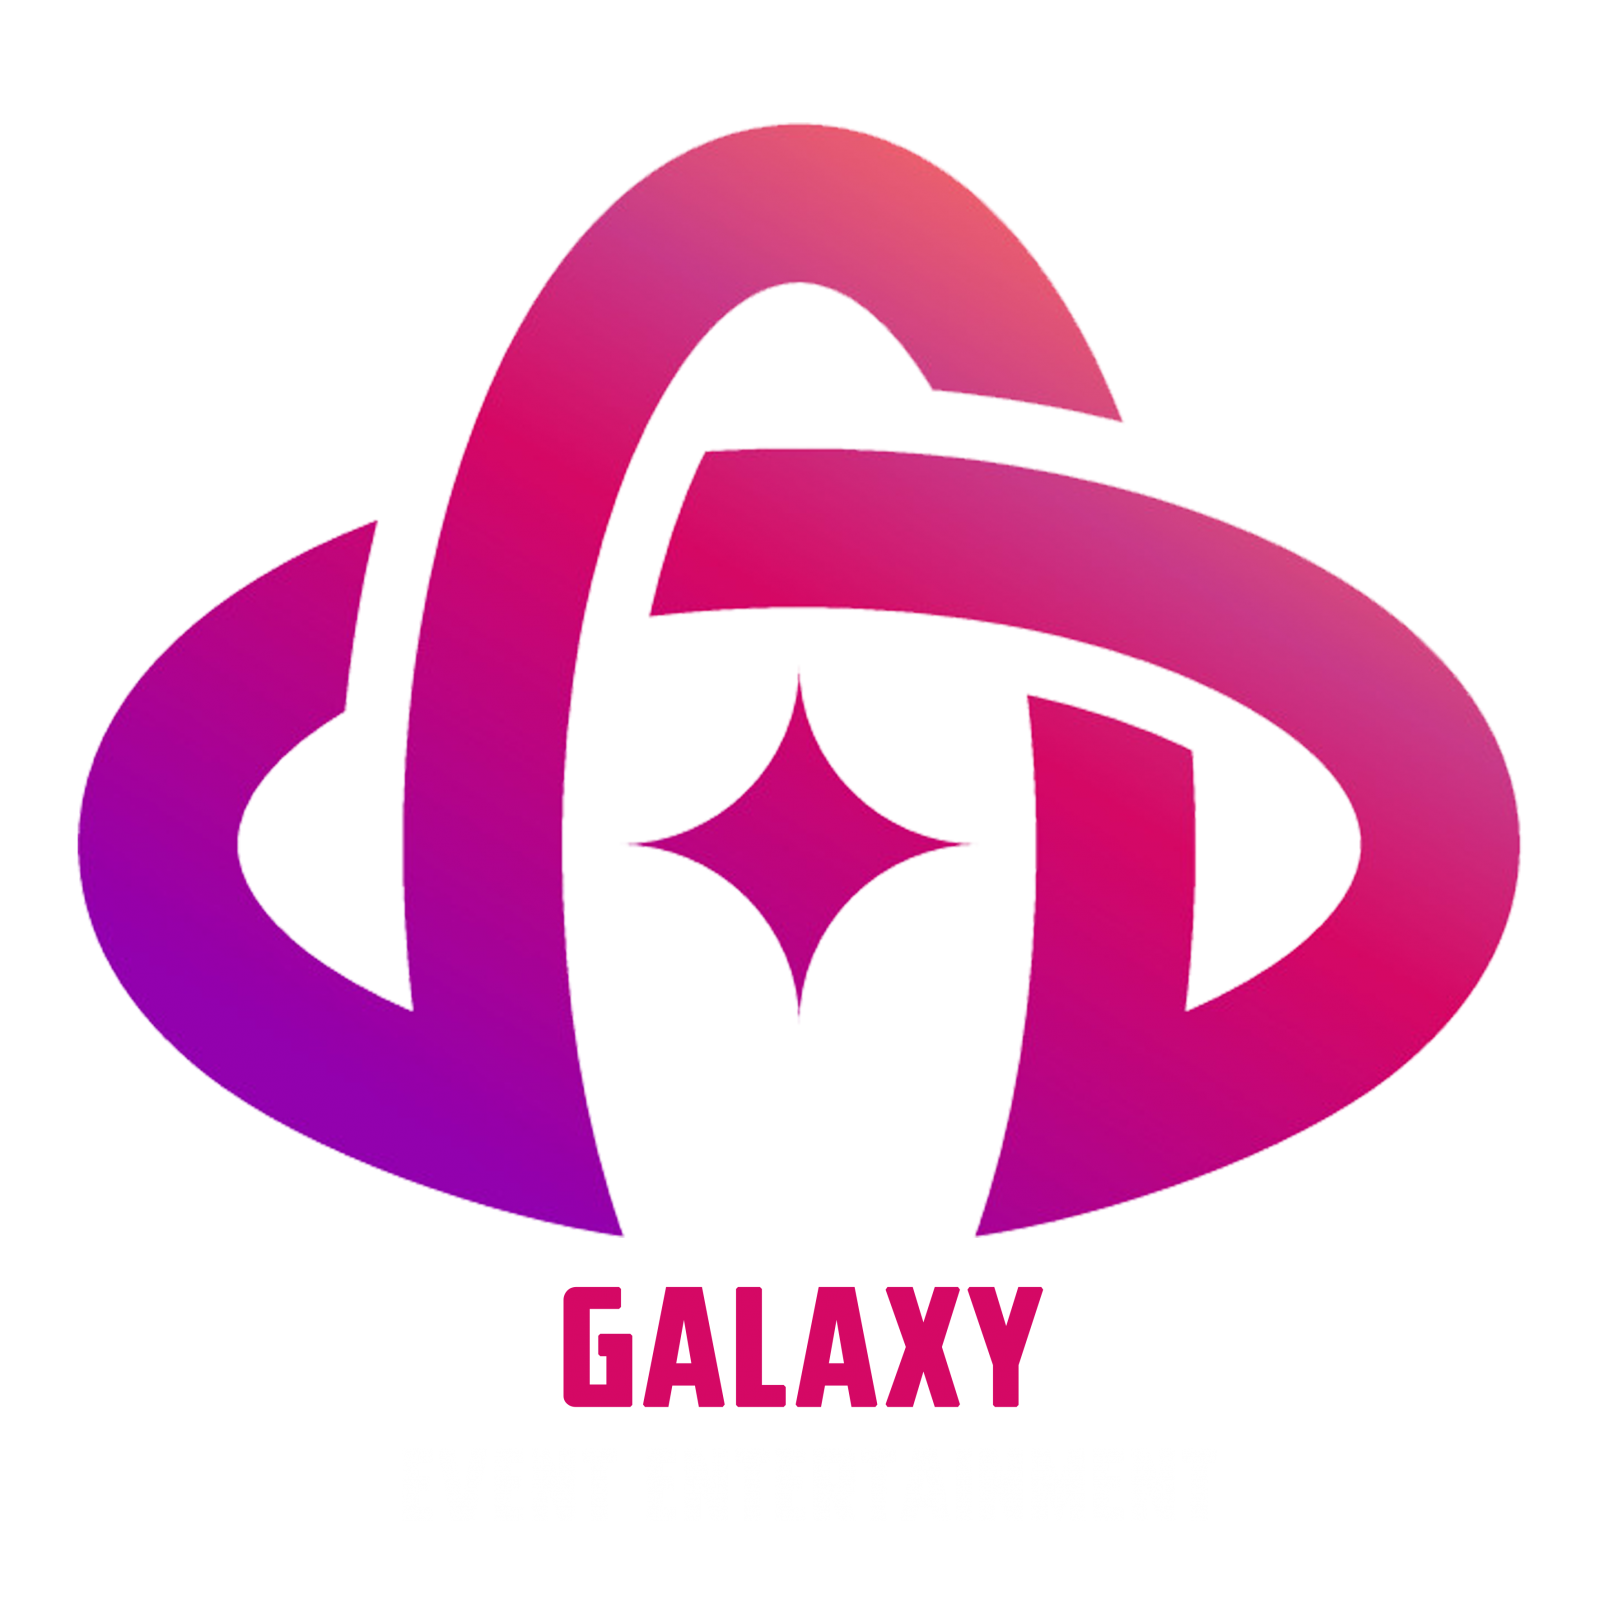 GALAXY COMMUNICATIONS & EVENTS